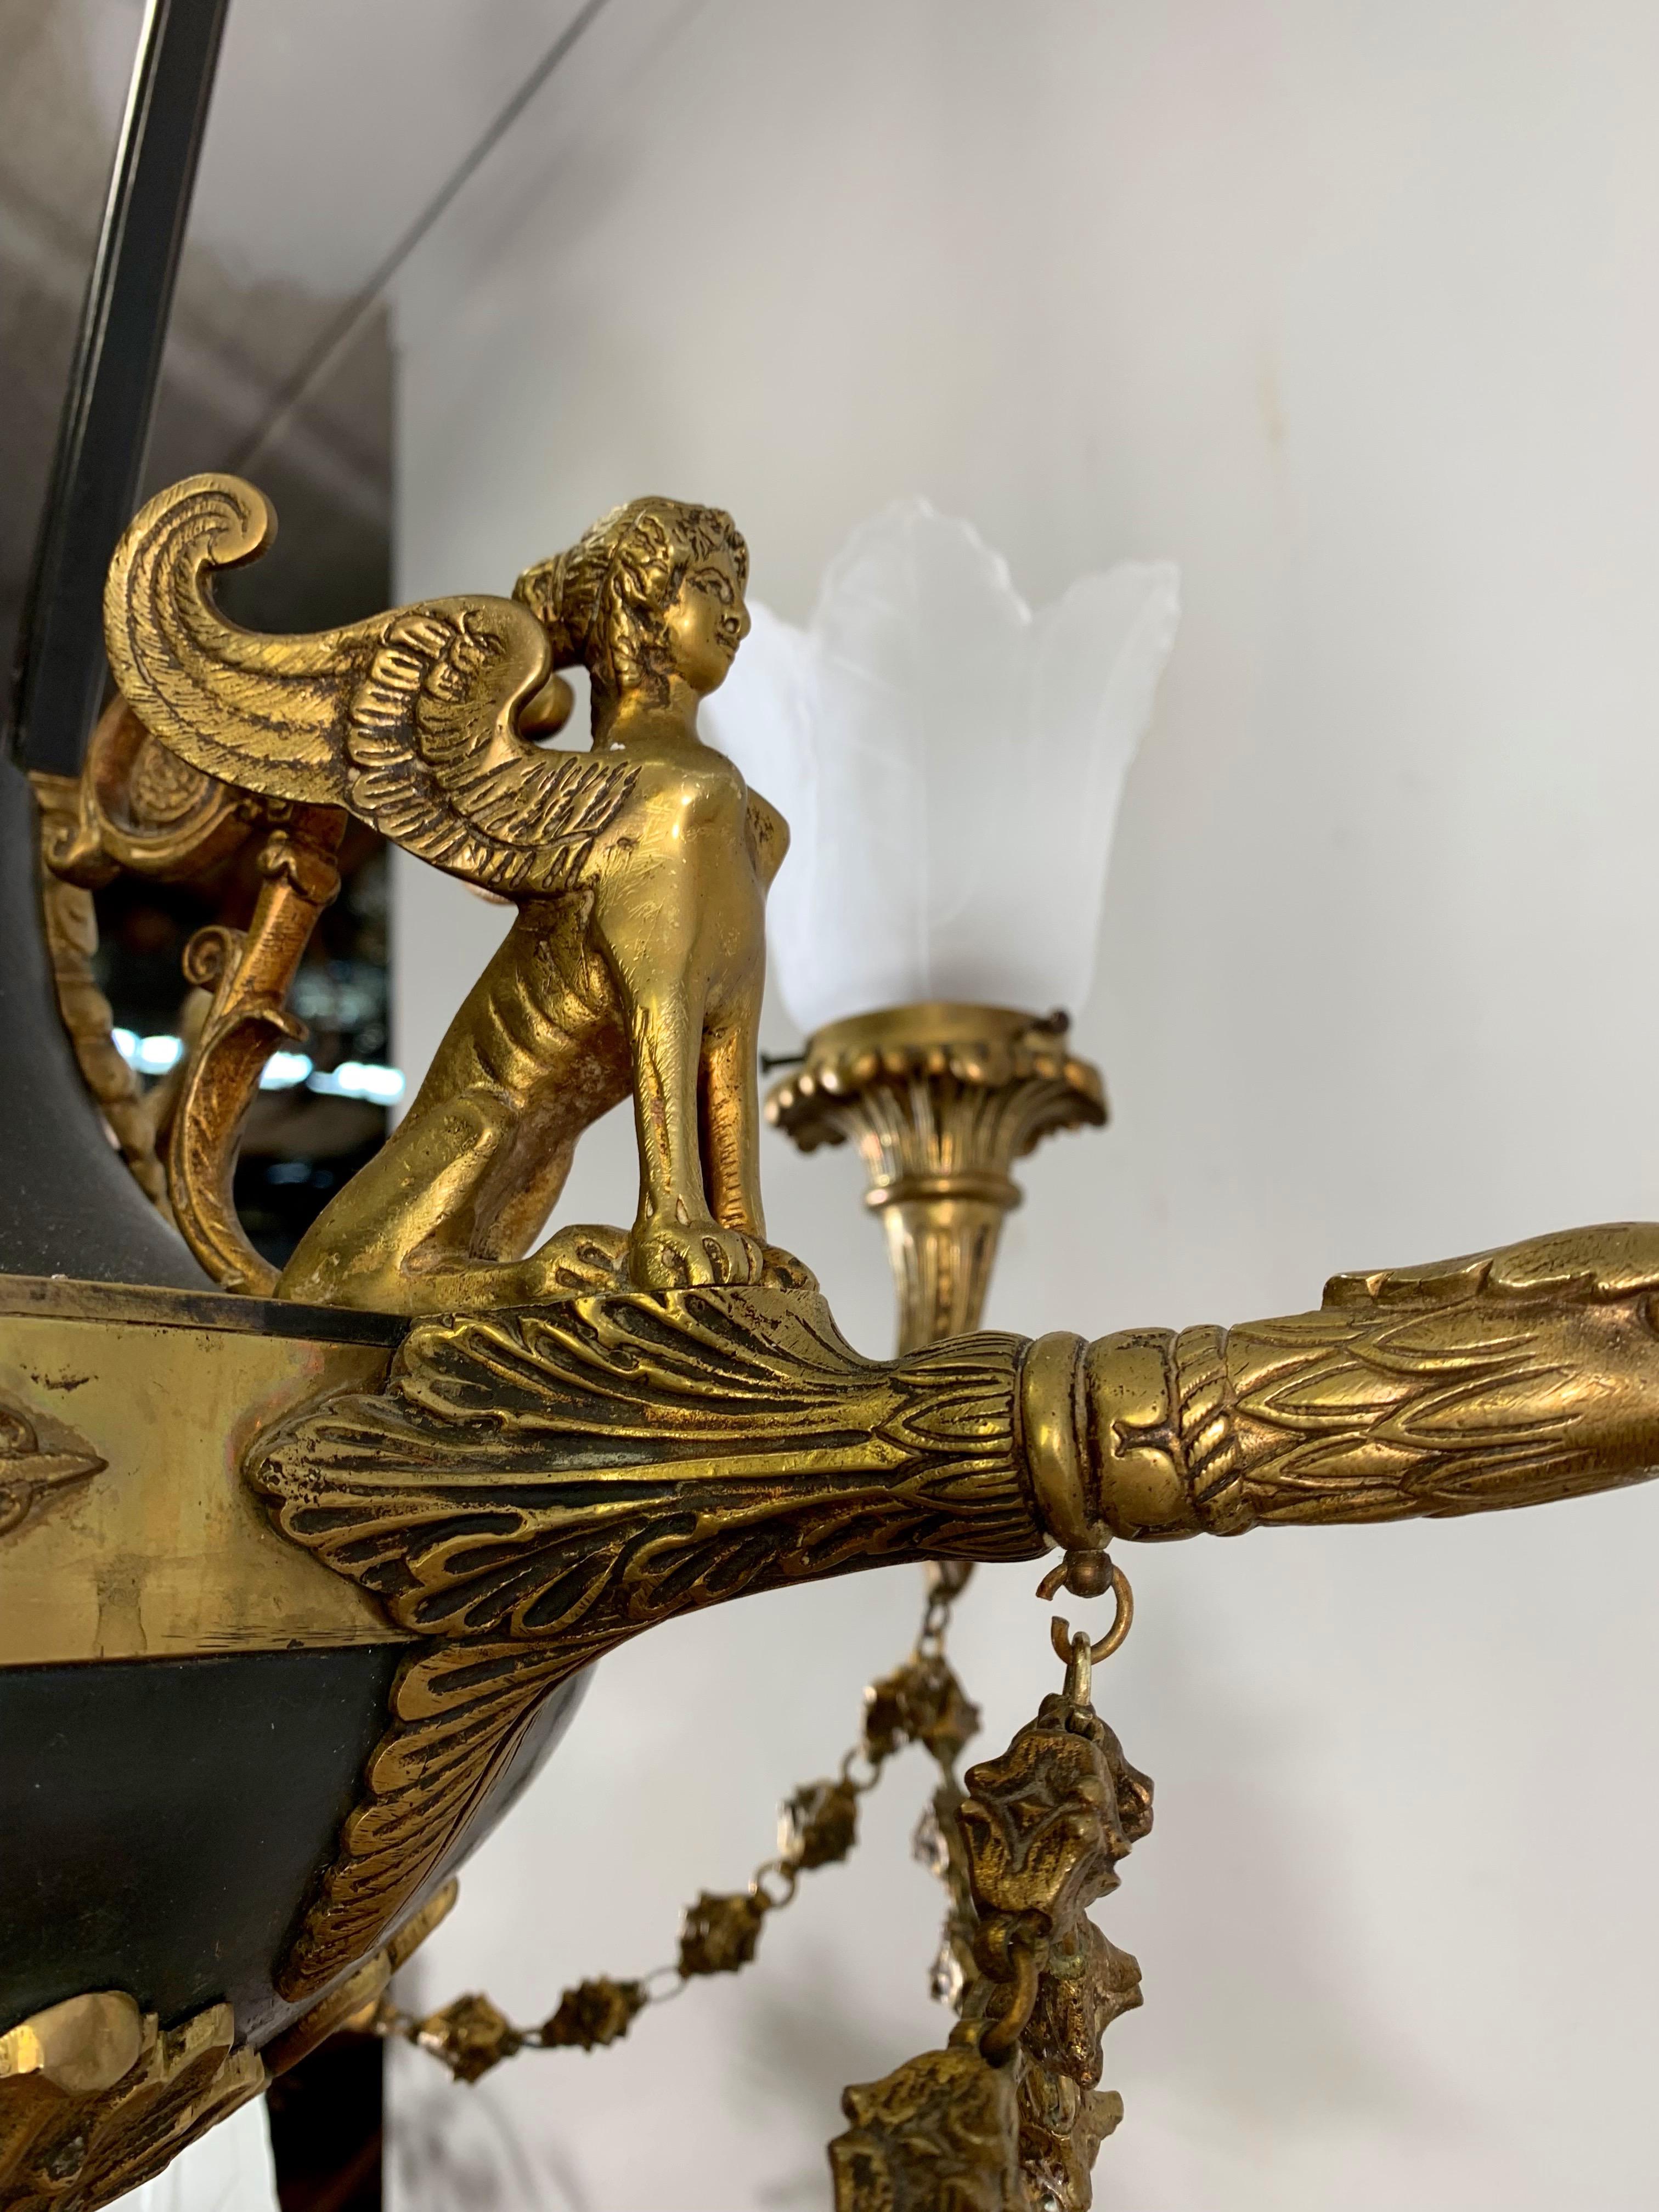 20th Century Antique French Empire Style Gilt Bronze Chandelier with Sphinx & Eagle Sculpture